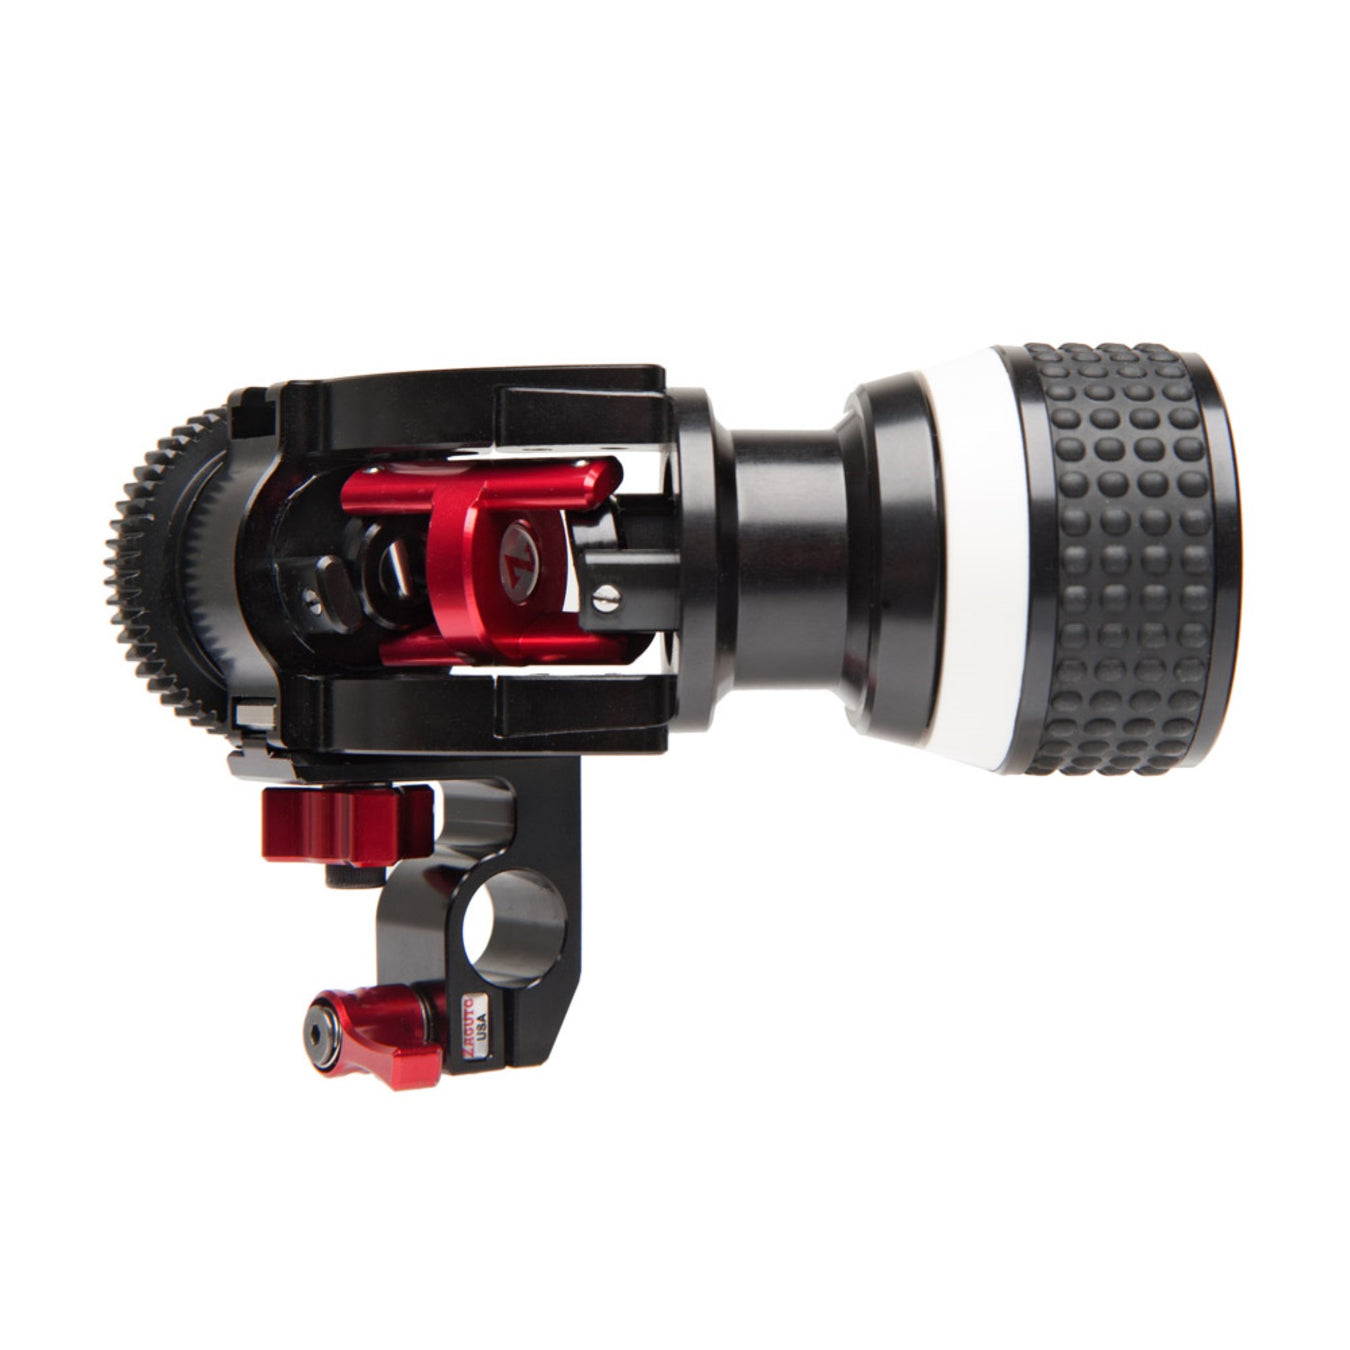 Follow Focus &  Lens Supports